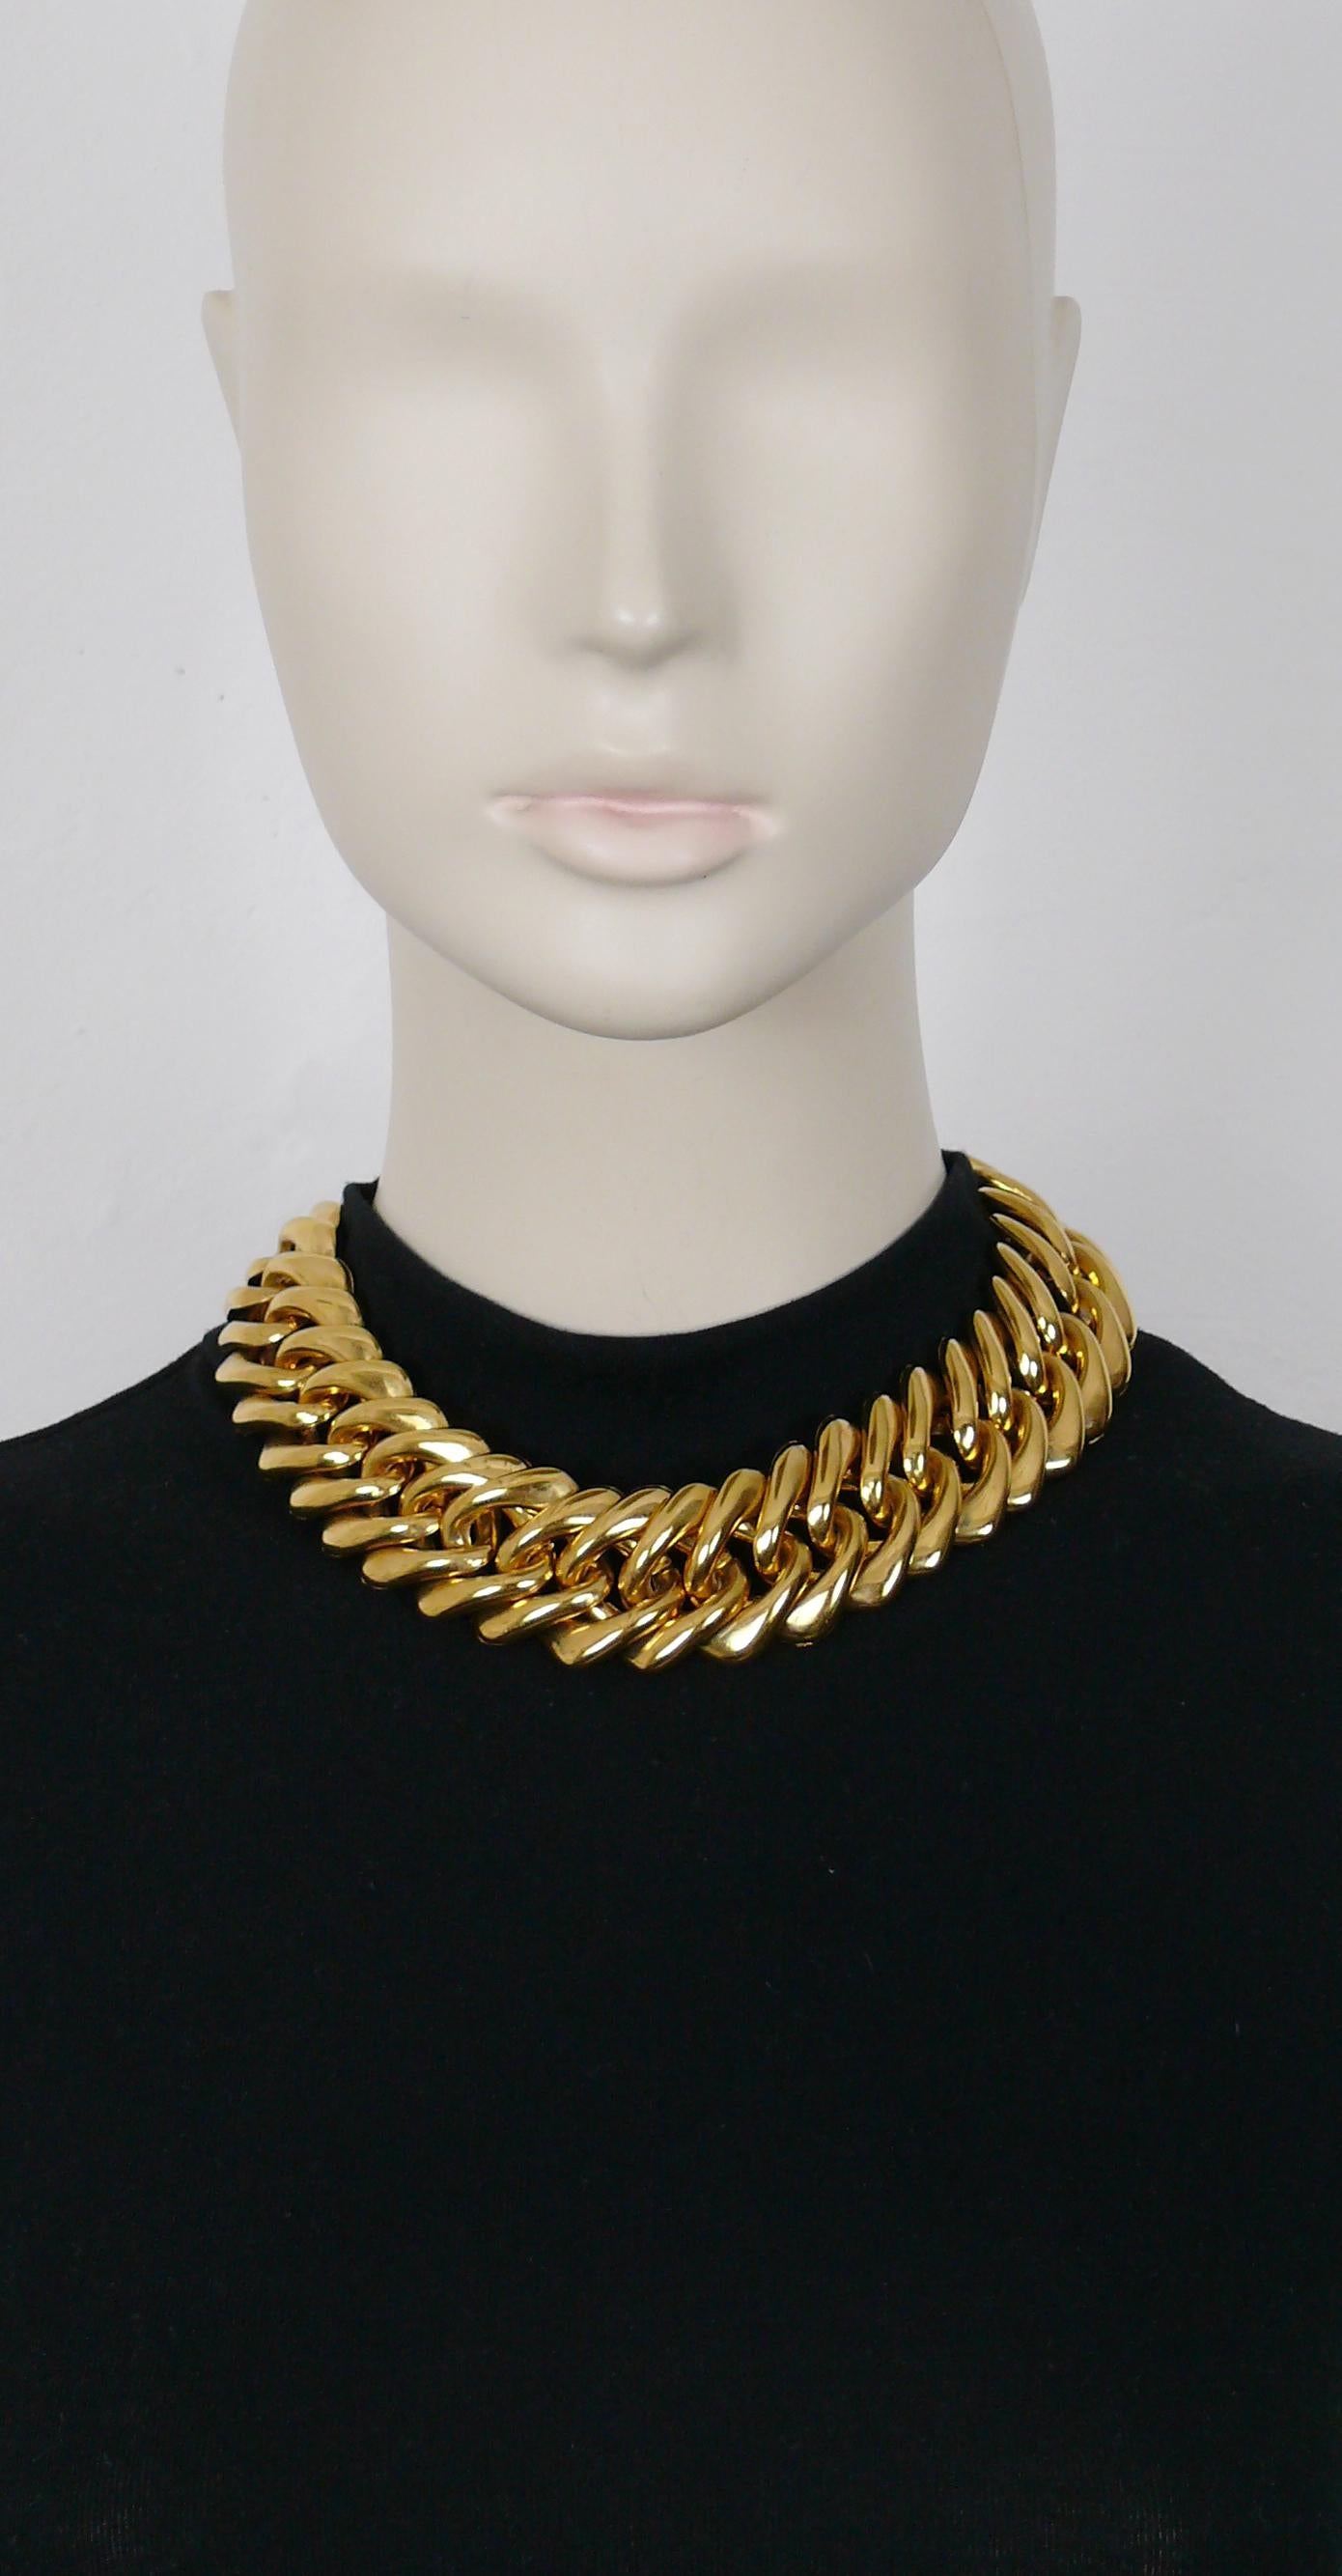 YVES SAINT LAURENT vintage iconic gold toned curb chain necklace.

Adjustable hook closure.

Embossed YSL Made in France.

Indicative measurements : adjustable length from approx. 42 cm (16.54 inches) to approx. 45 cm (17.72 inches) / width approx.